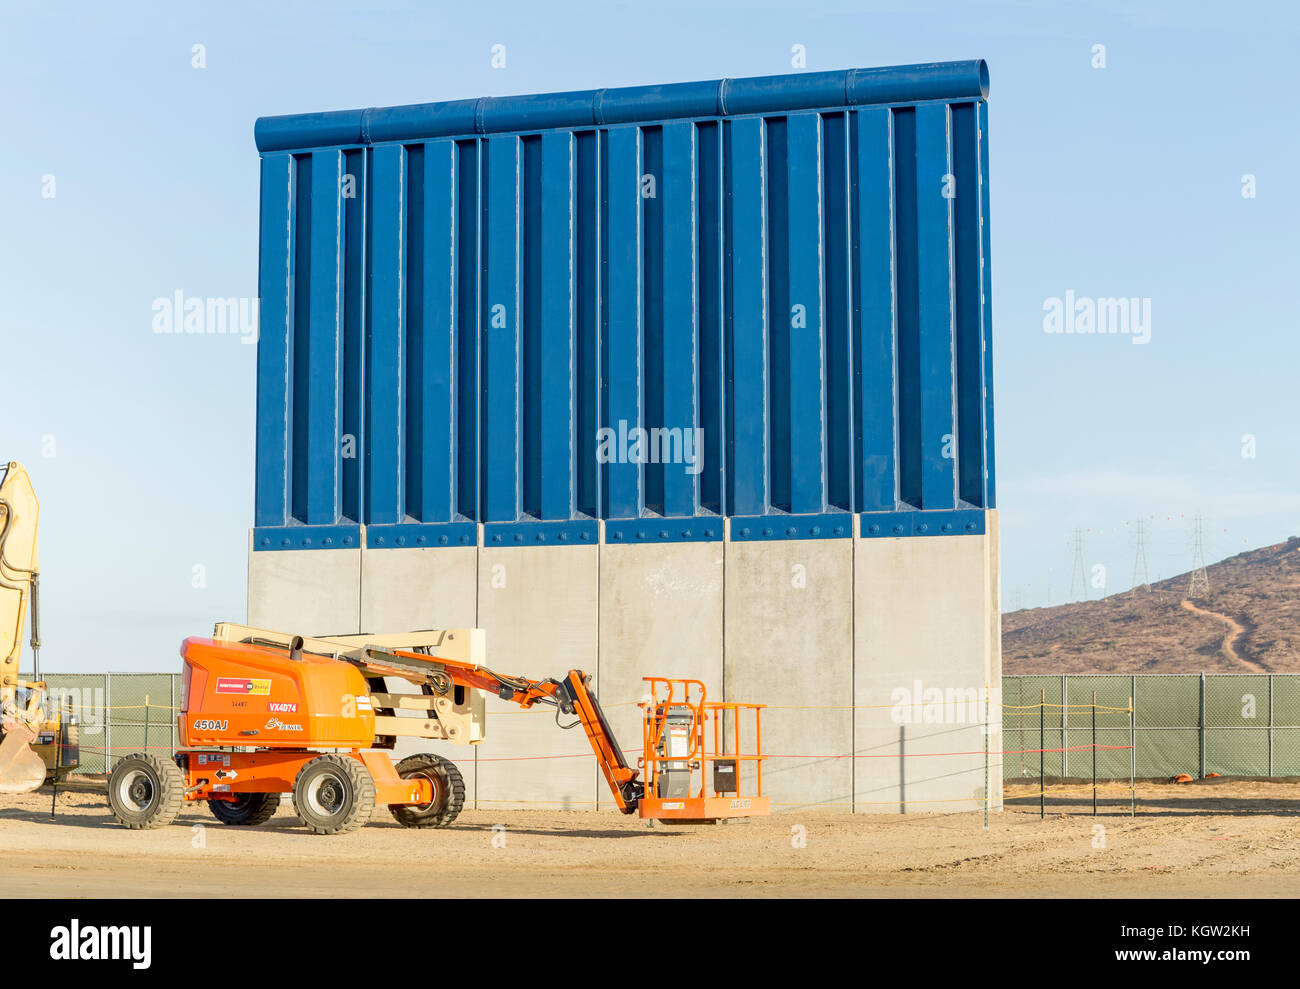 Trump administration new US-Mexico border wall prototypes are unveiled in October 2017. This prototype made in concrete and steel is designed and built by ELTA North America Inc., a company based in Annapolis. The prototypes will be subjected to testing to ensure they can withstand attack and attempts to go through, under and over them. See more information below. Stock Photo